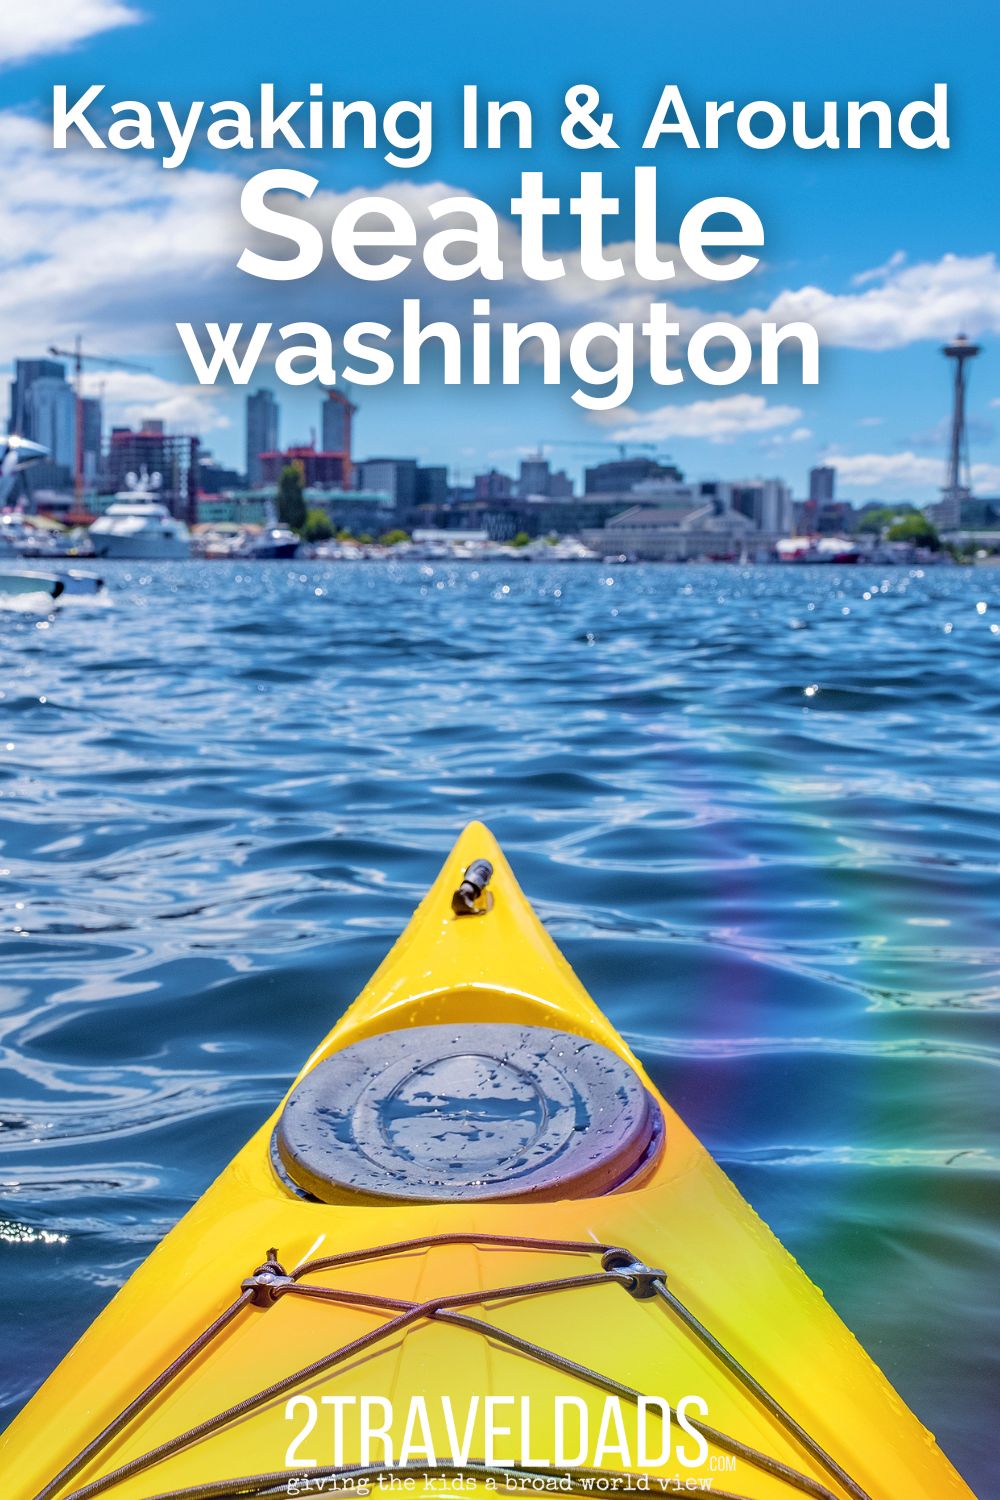 Kayaking in and around the Seattle Area is one of the best ways to enjoy the outdoors in the Pacific Northwest. Guide to spots to launch and kayak near Seattle any time of year.